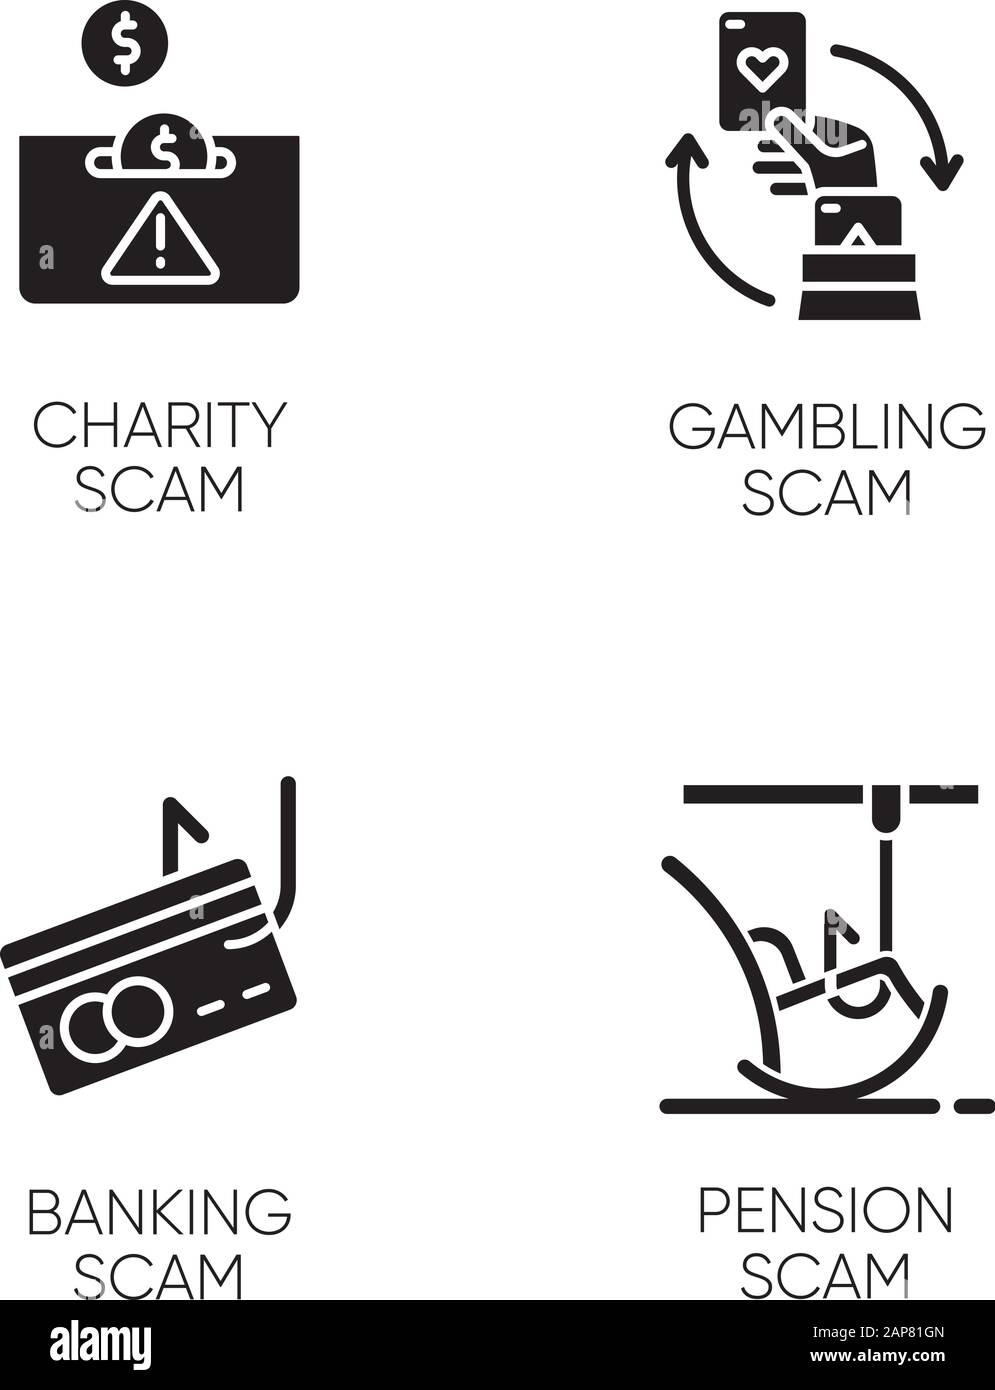 Scam types glyph icons set. Charity, pension fraudulent scheme. Gambling, banking trick. Cybercrime. Financial scamming. Illegal money gain. Silhouett Stock Vector